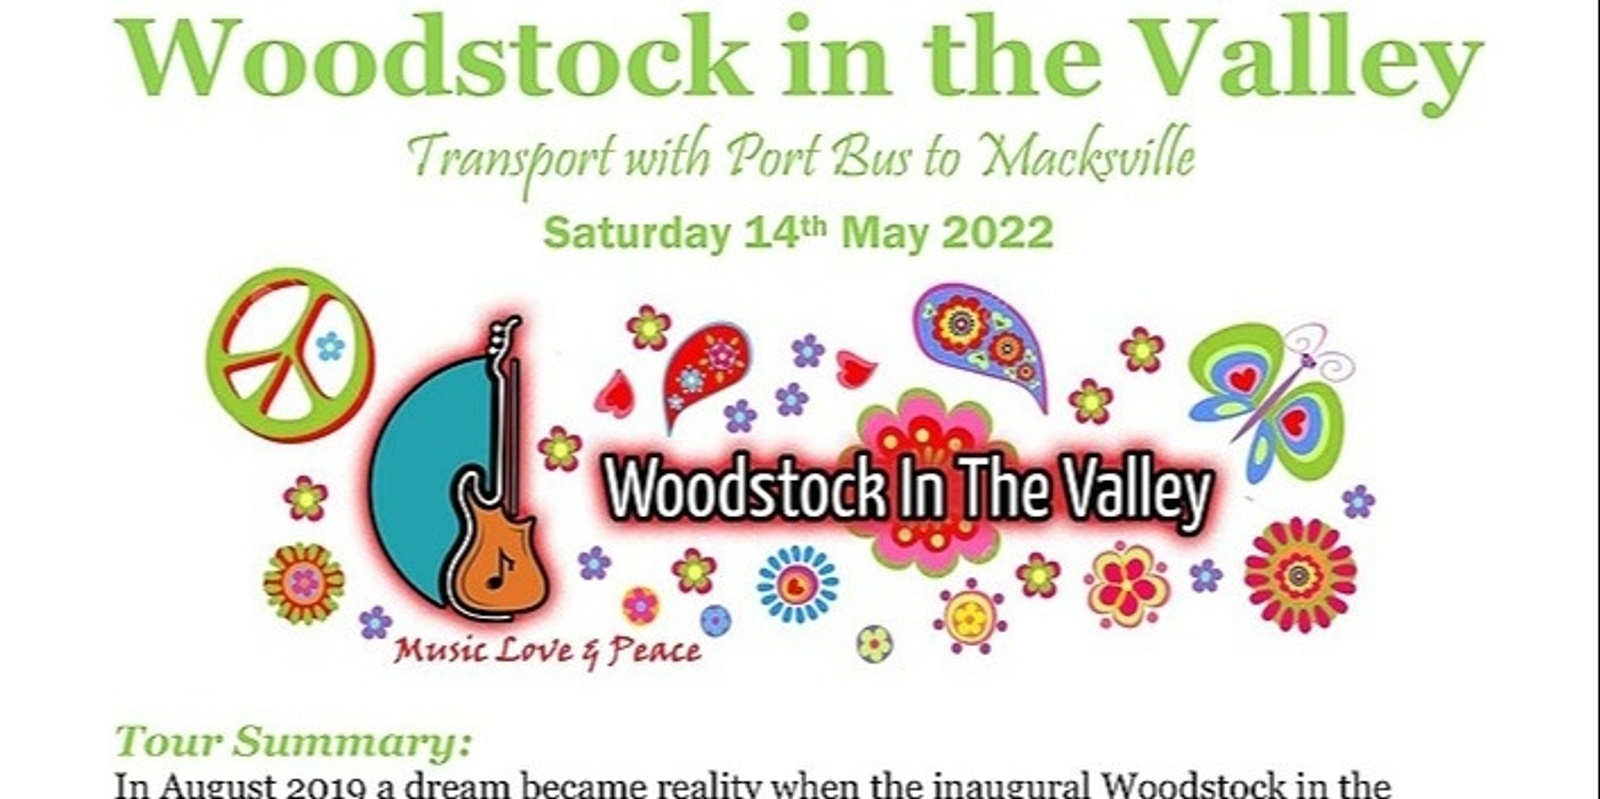 Banner image for Woodstock in the Valley transport